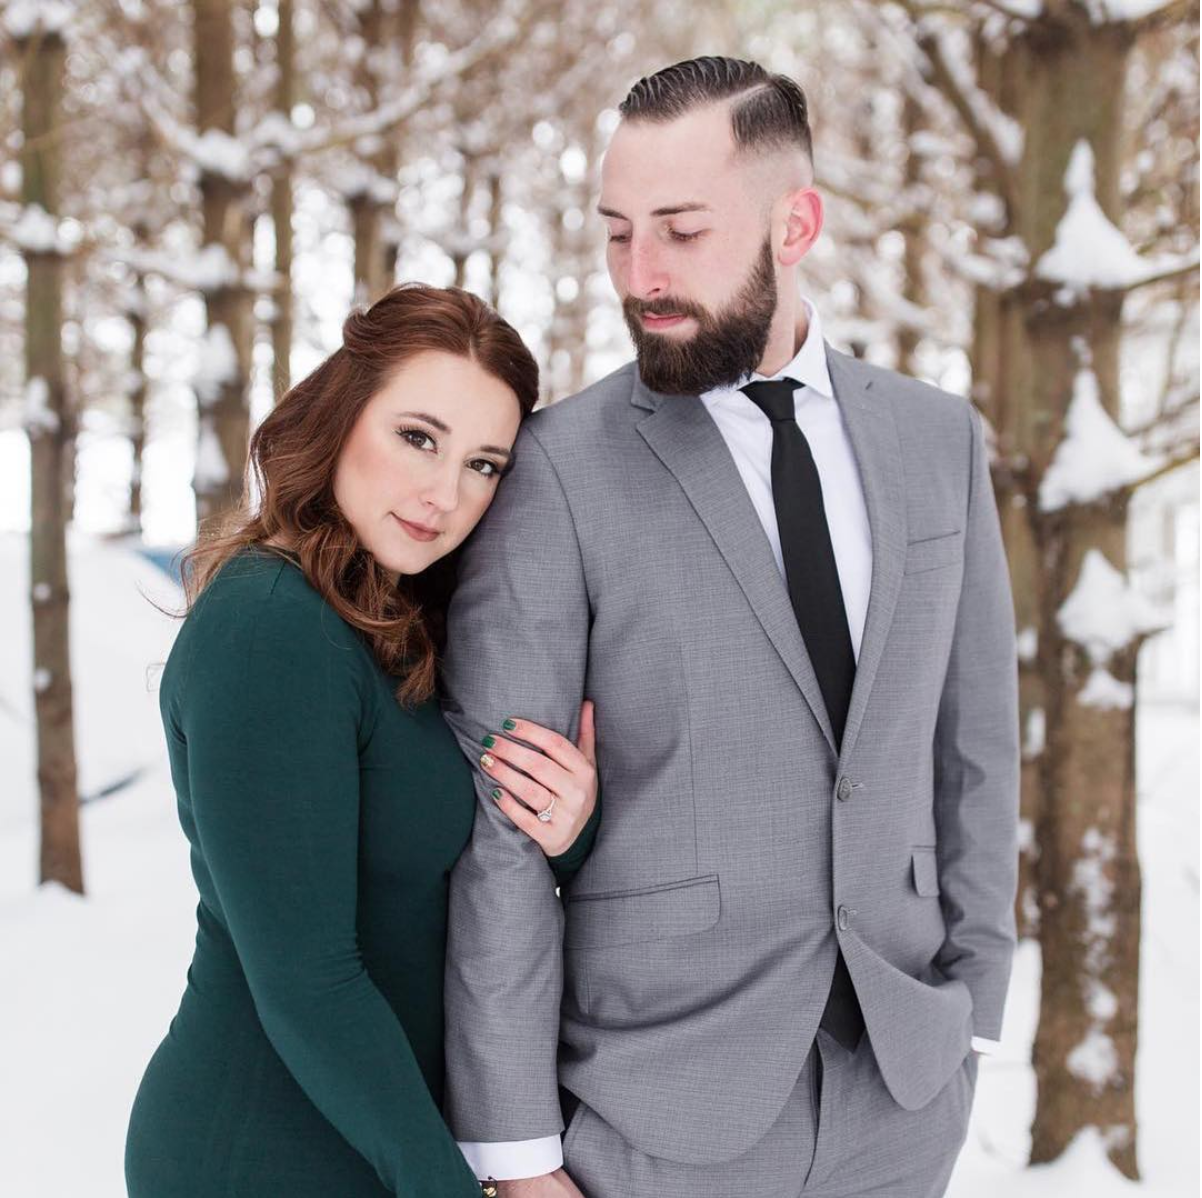 Orchard-house-Michelle-Joy-Photo-engagement-pine-forest-snow.png